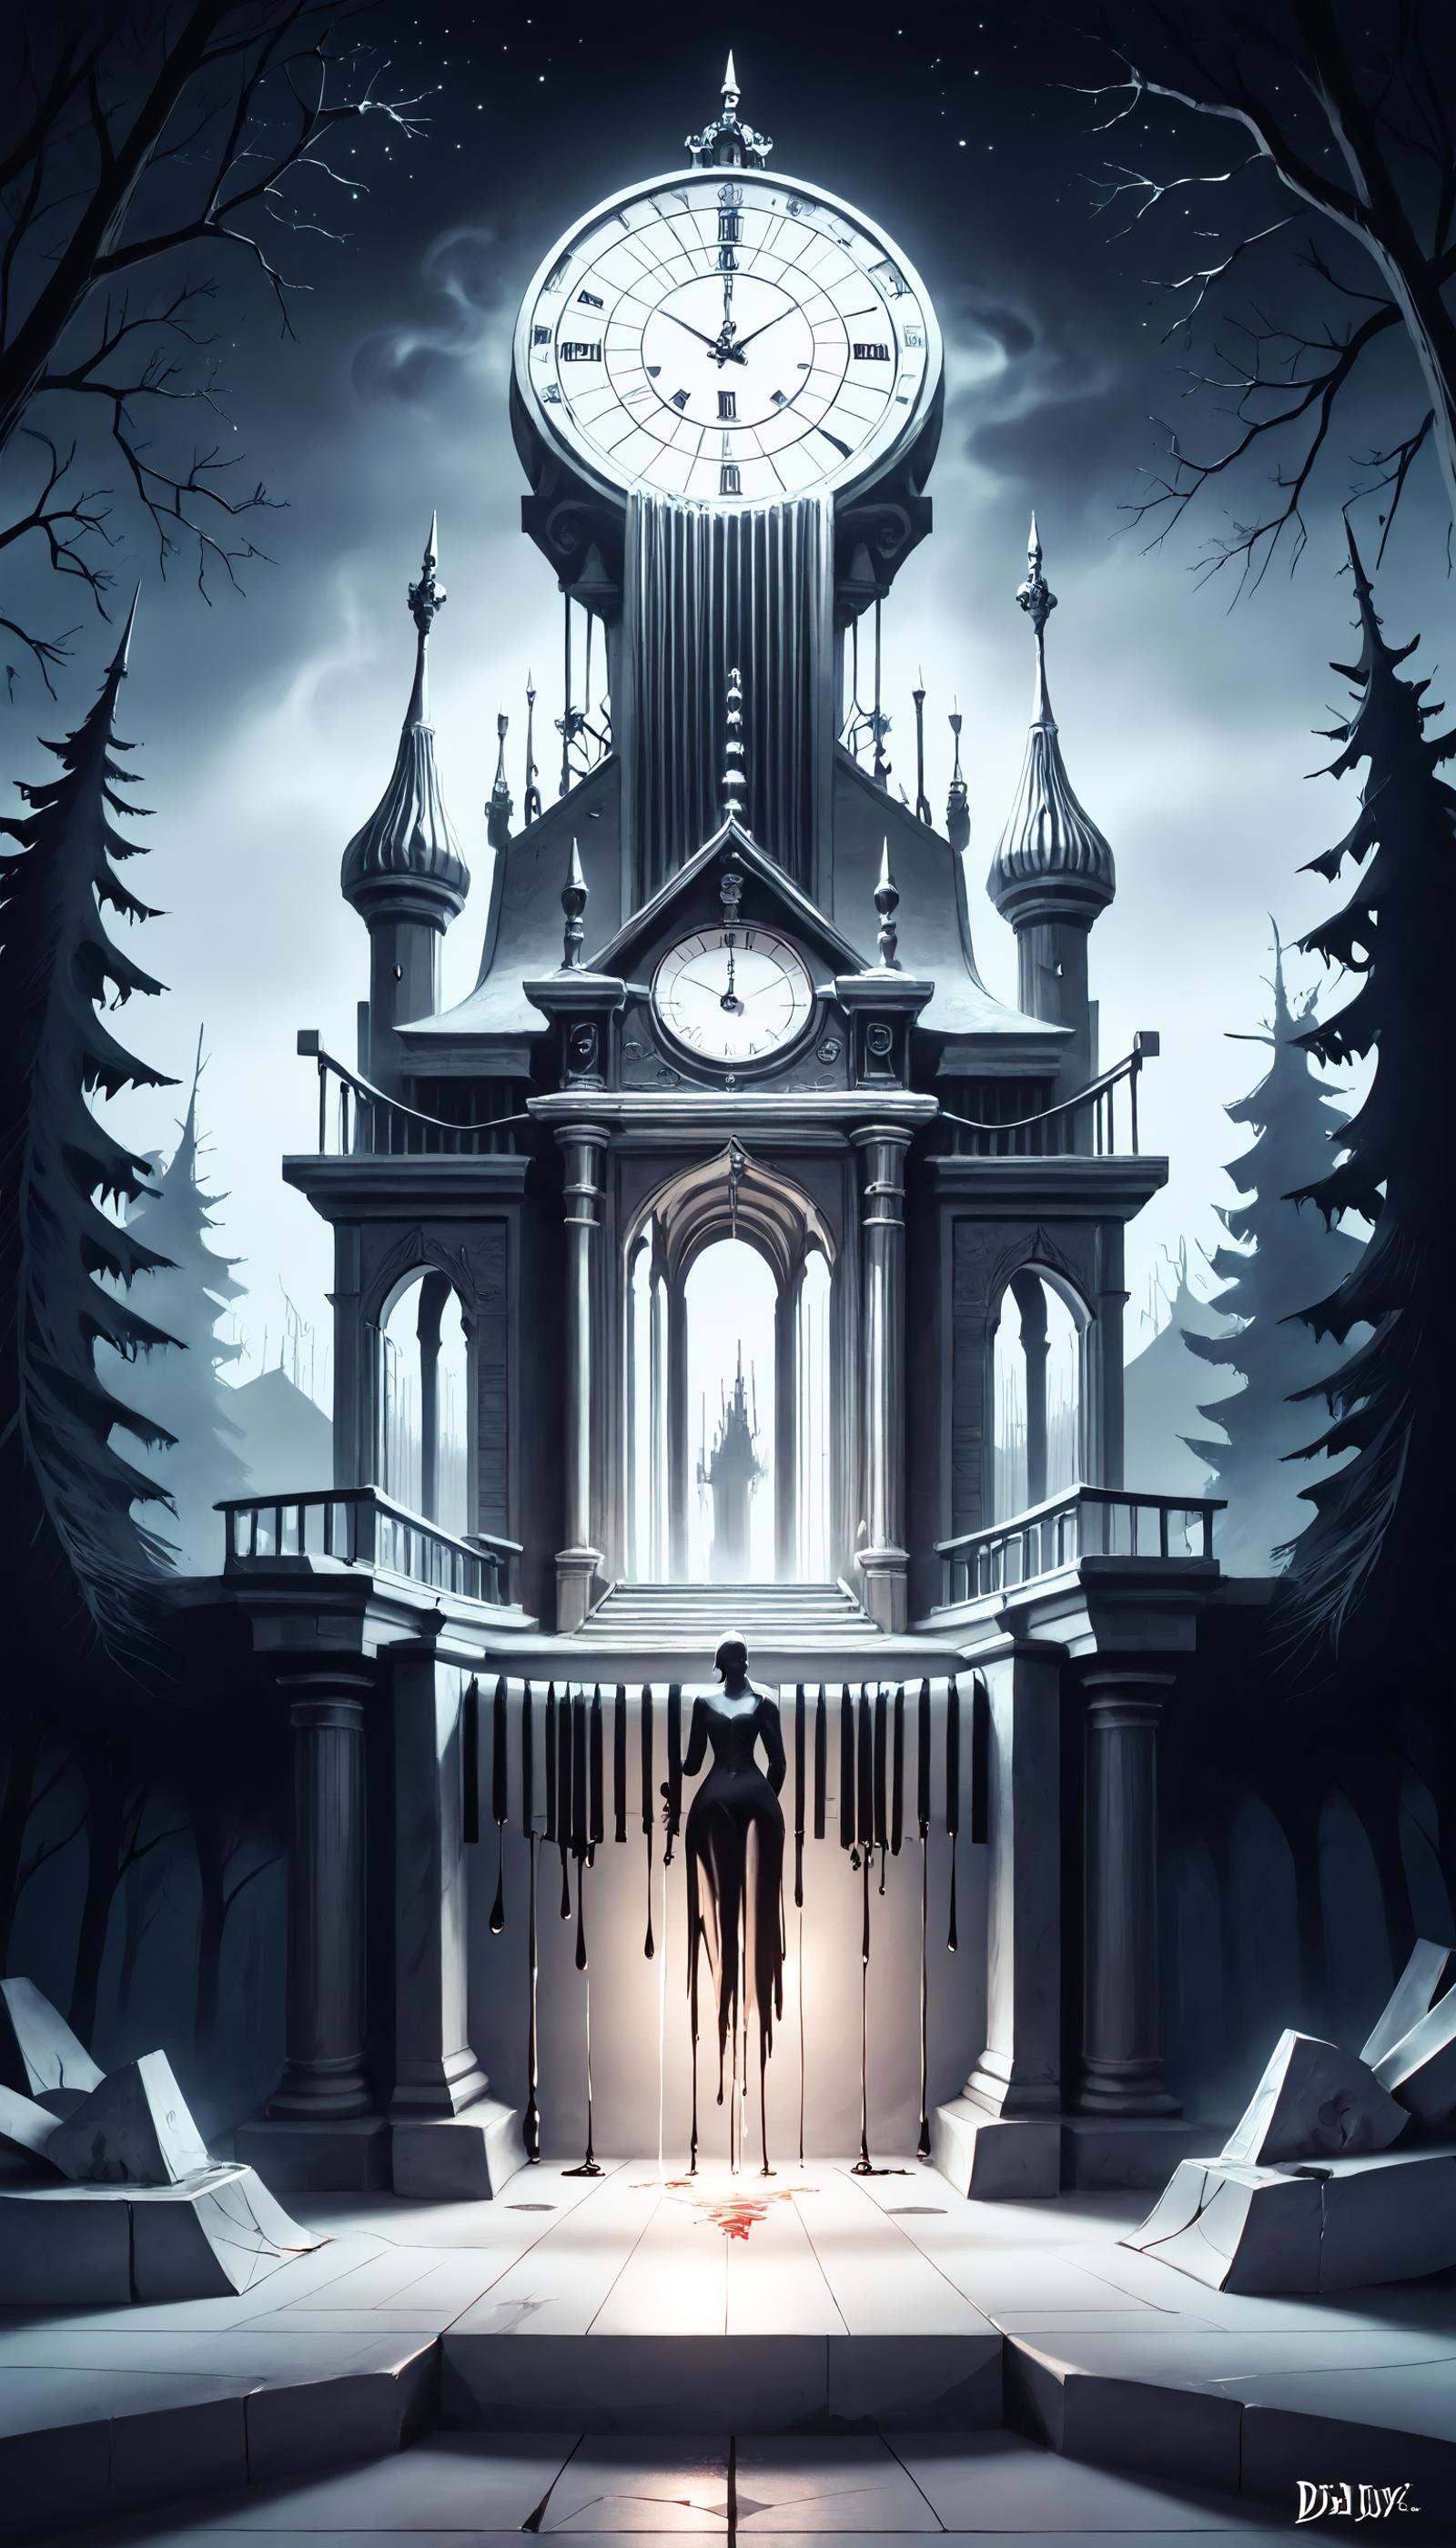 score_9, score_8_up, score_7_up, score_6_up, score_5_up, <lora:PianoStylePony:0.8> elegant, luxury, reflective, PianoStyle Realistic oil painting of a grand, ornate, antique, rusted grandfather clock in the grand hall of a dark, creepy, haunted mansion, overgrown with ivy, standing out against the moonlit temple ruins in the background, crumbling stones, gnarled trees, foggy night, spooky, eerie, ominous, dark, ominous shadows, cool color palette, dimly lit, chiaroscuro, masterpiece, highly detailed, intricate, textured, oil on canvas, art by Caspar David Friedrich or Ivan Aivazovsky, ebony & ivory, <lora:Smooth Style 2 SDXL_LoRA_Pony Diffusion V6 XL:0.75> <lora:add-detail-xl:1.5>, (Masterpiece:1.3) (best quality:1.2) (high quality:1.1)